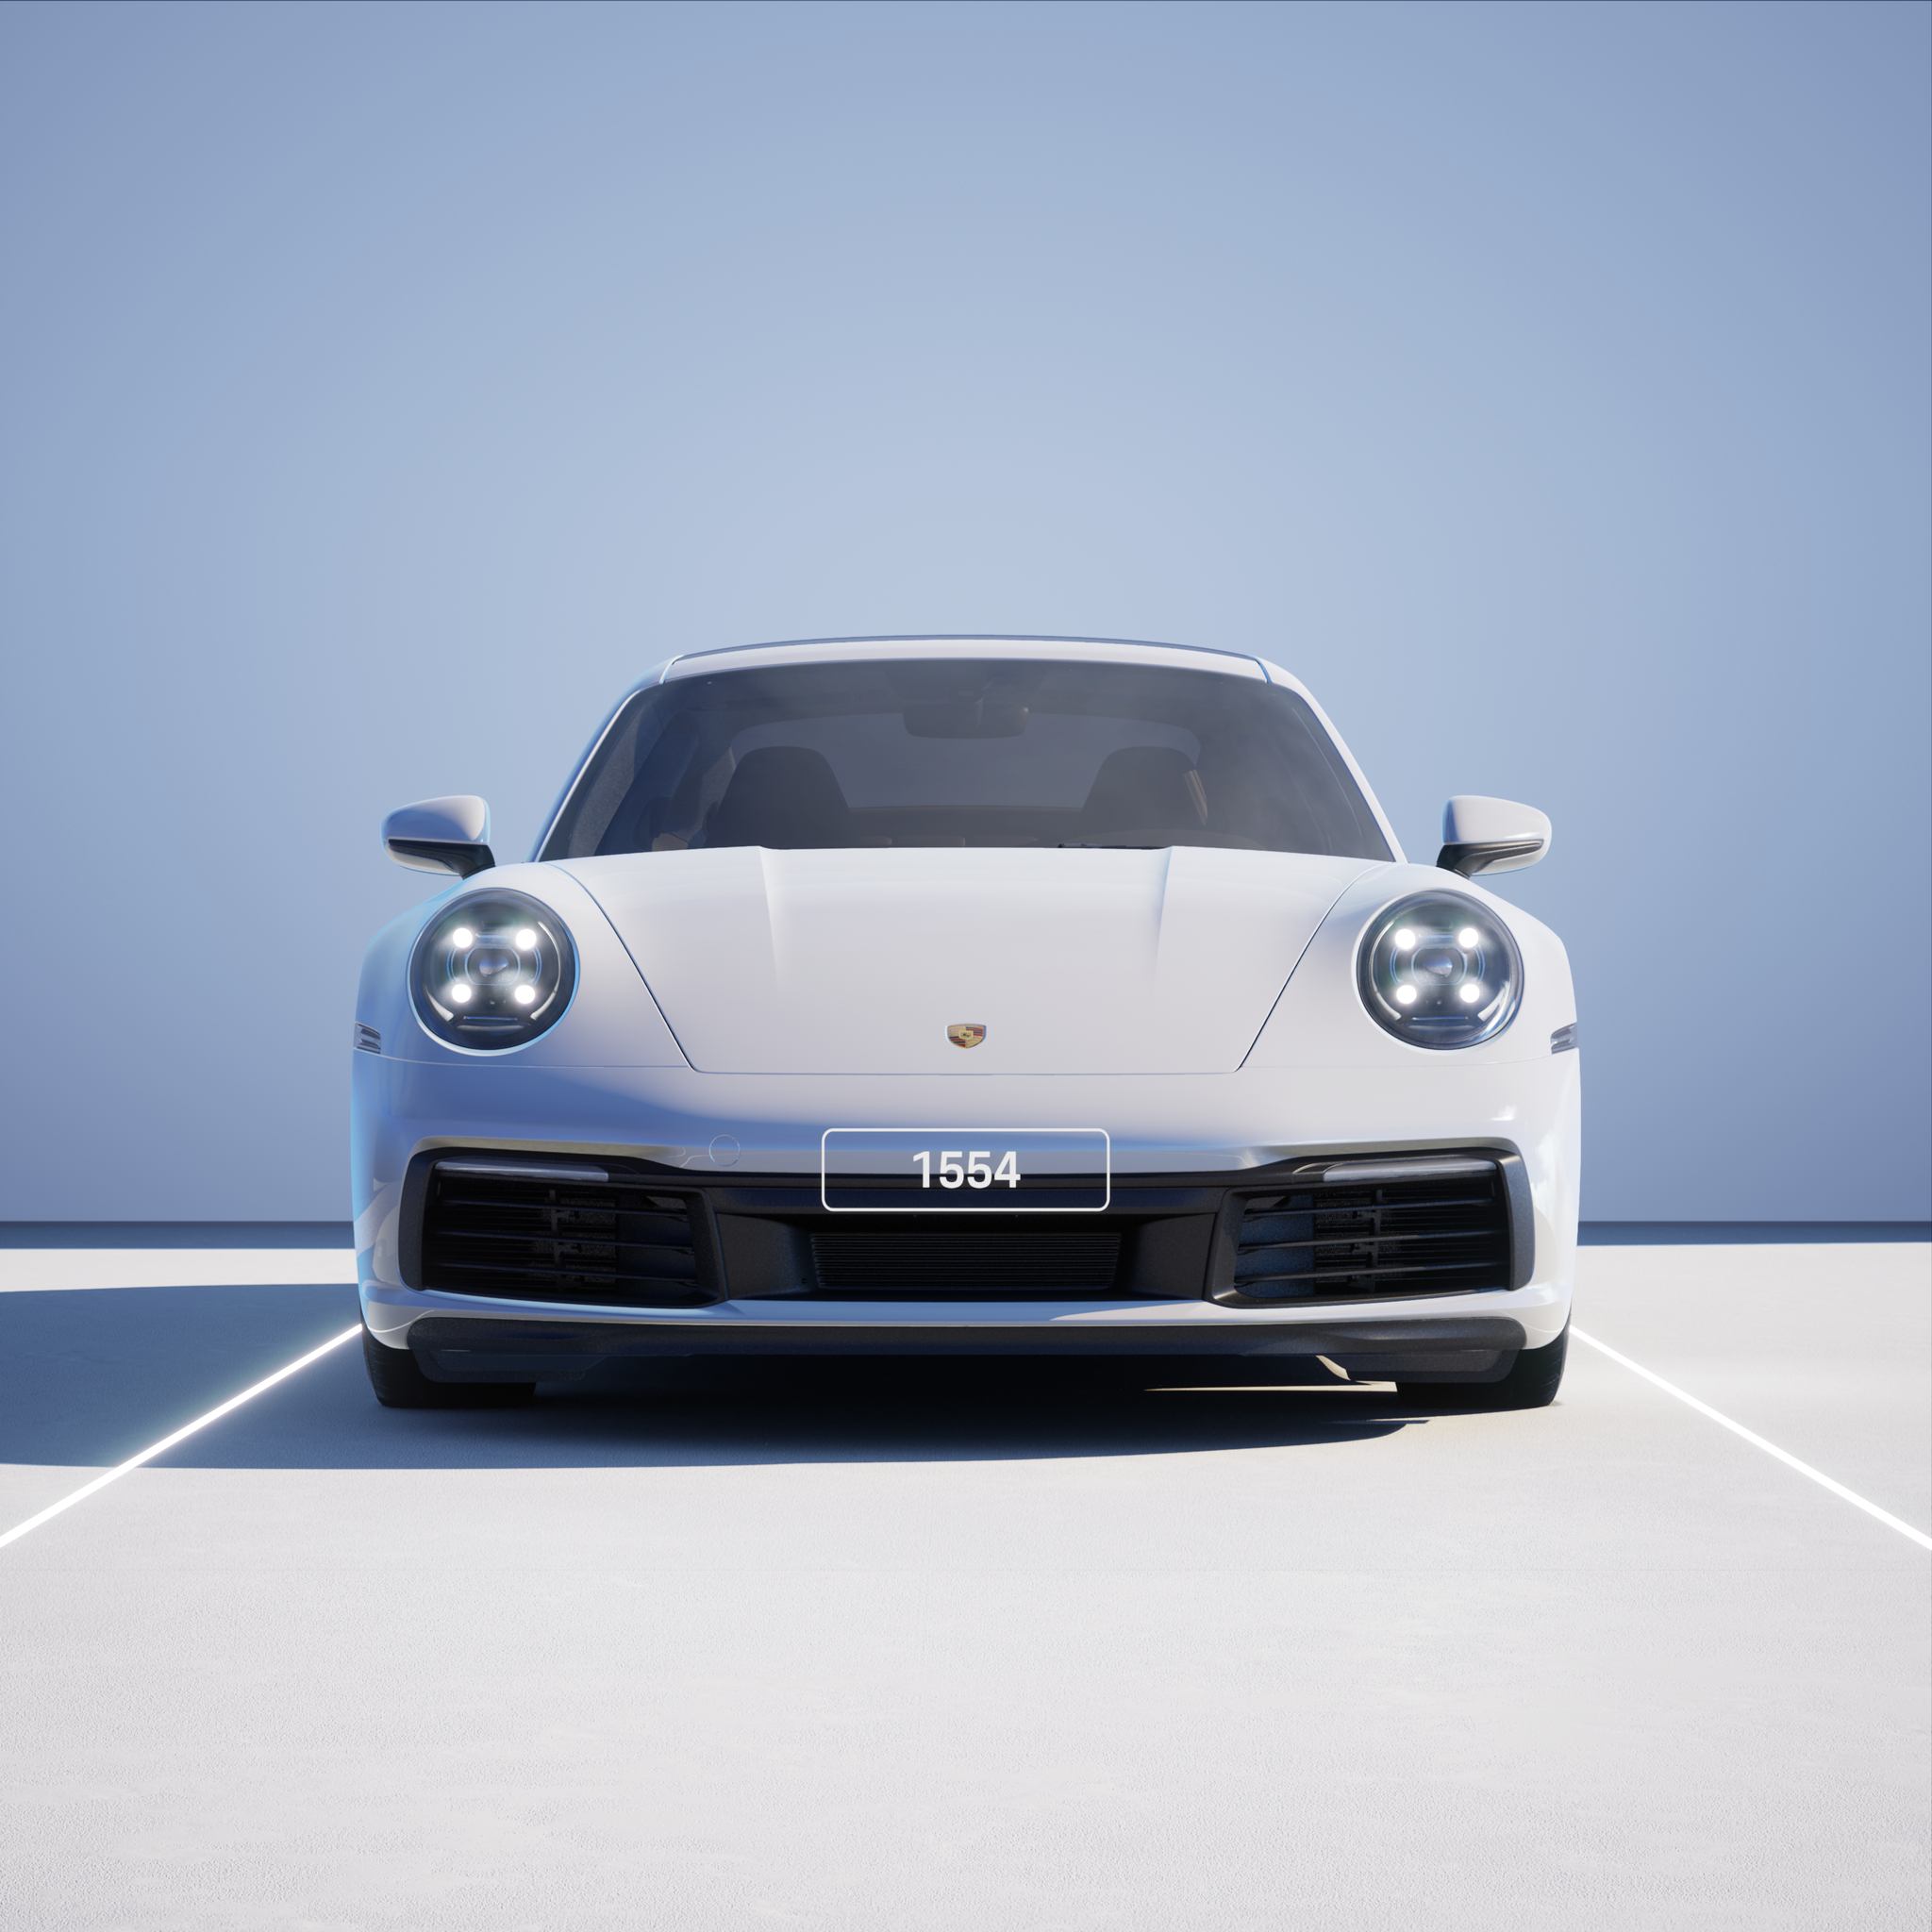 The PORSCHΞ 911 1554 image in phase